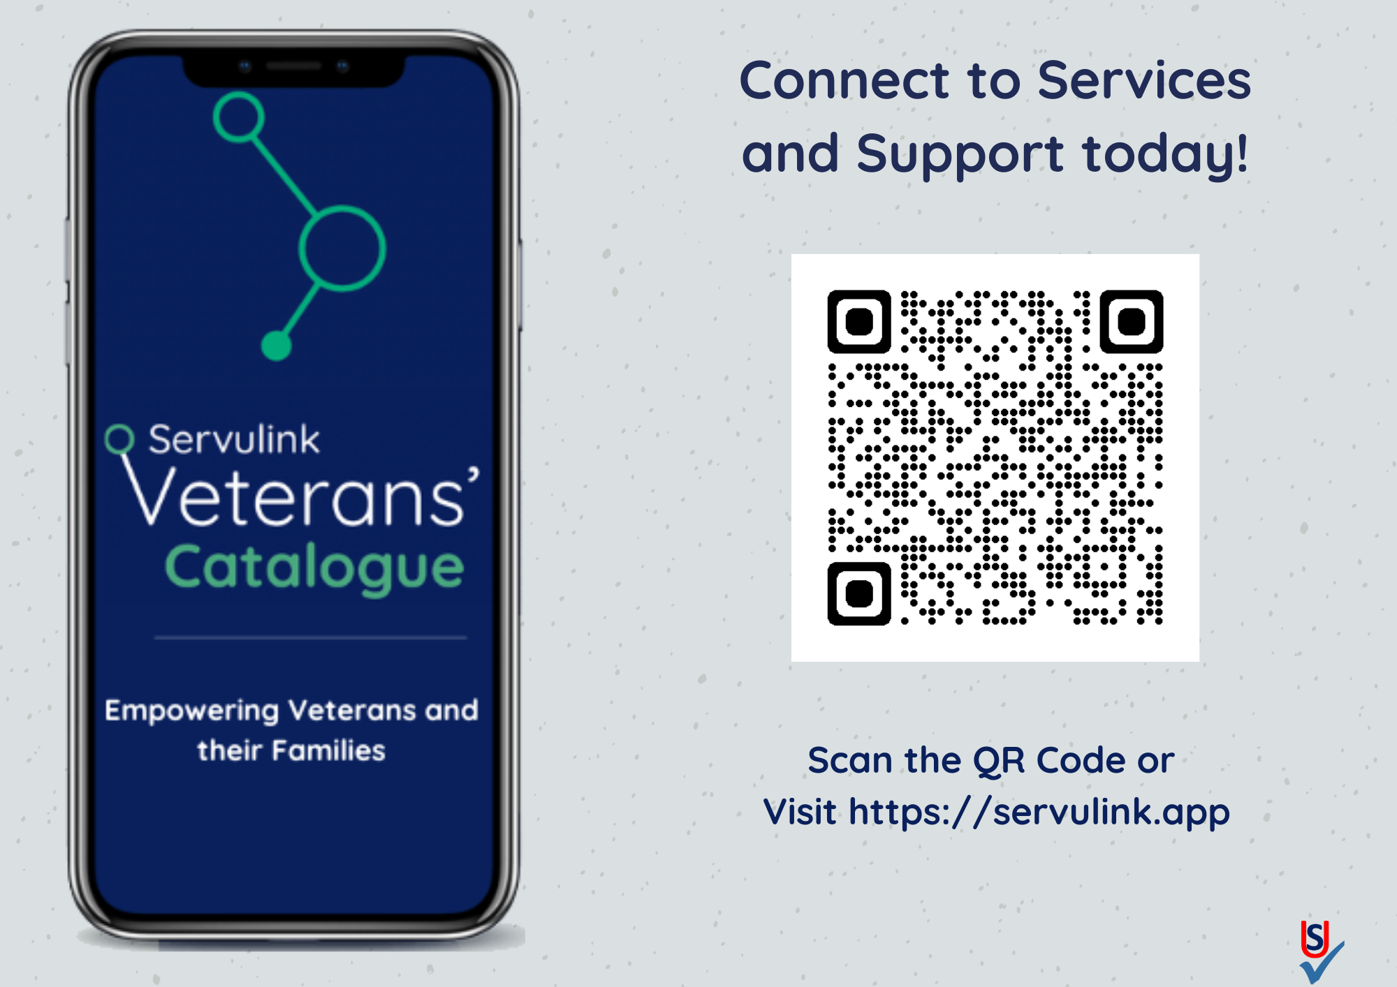 Connect to Services and Support today!